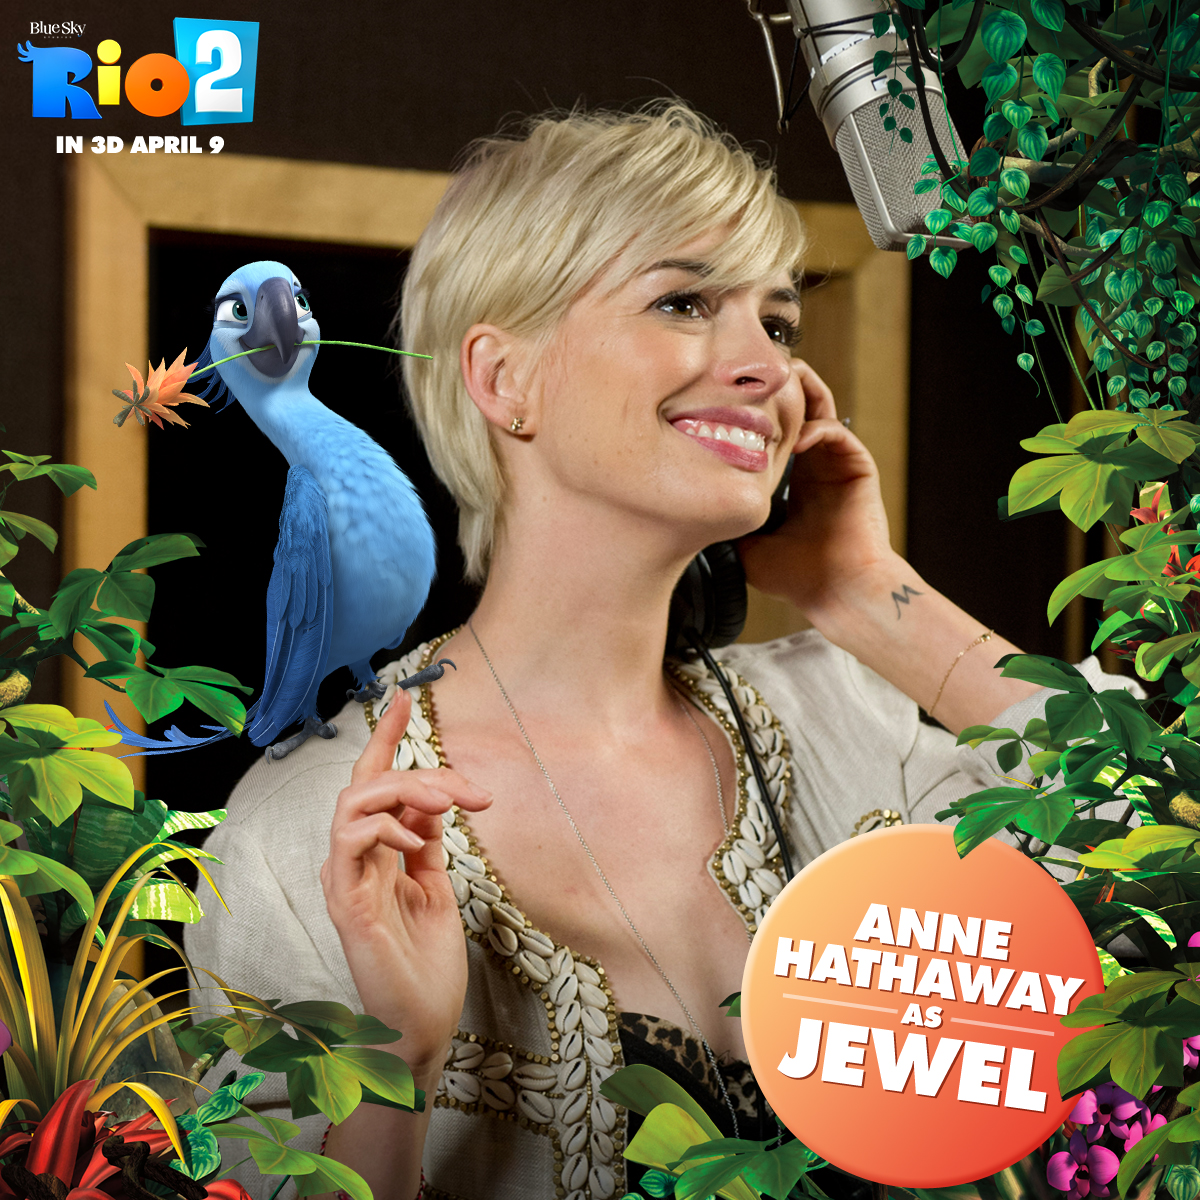 anne as jewel in RIO2